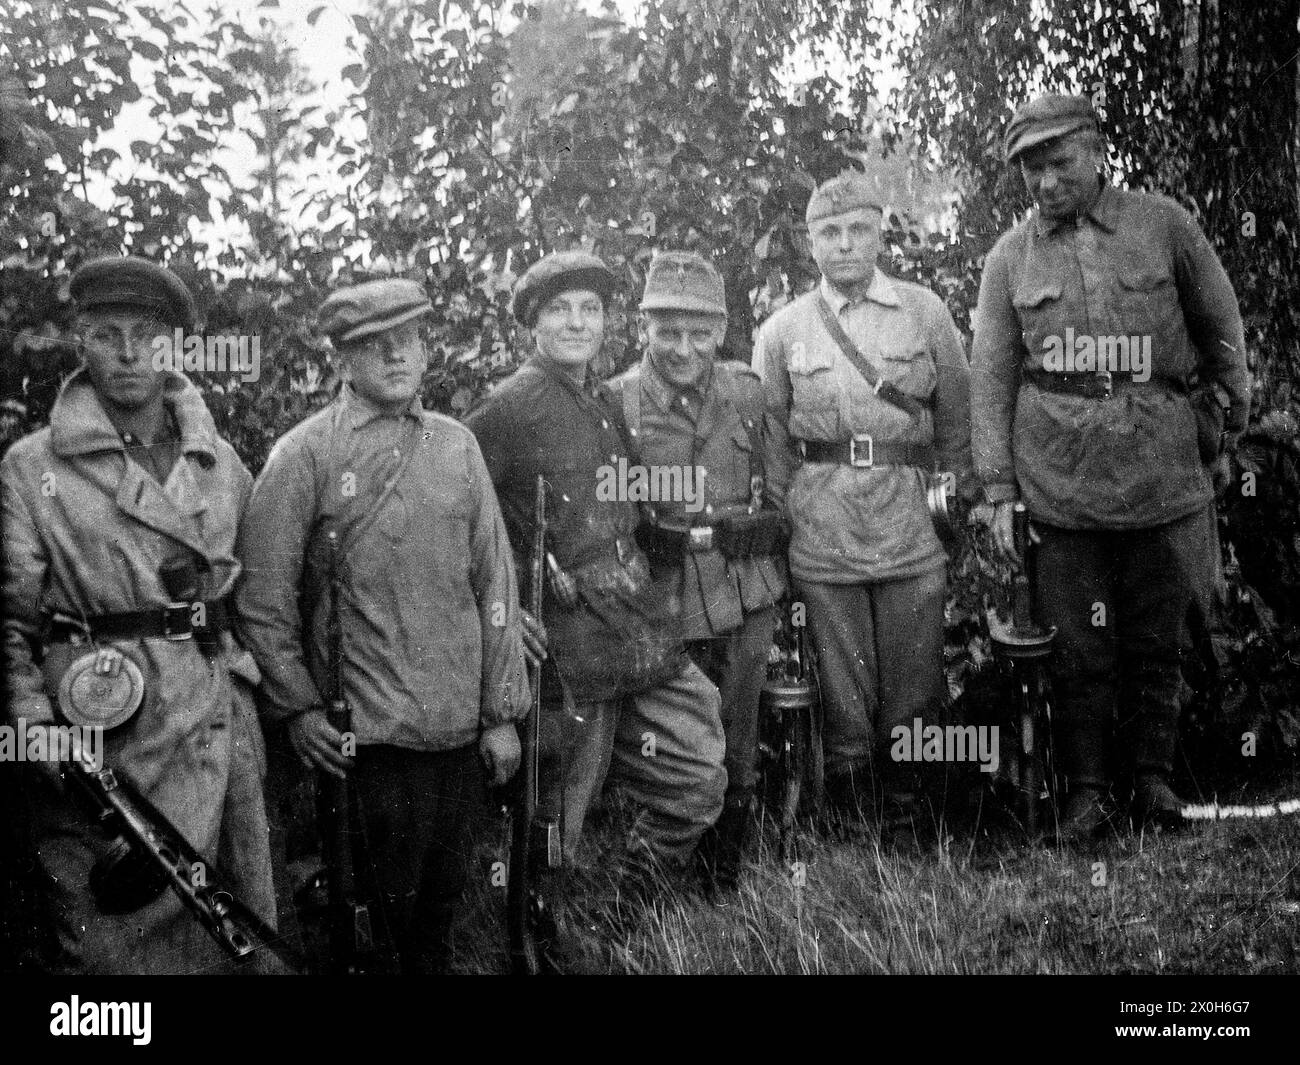 Group photo of Russian auxiliary troops fighting partisans with a Wehrmacht soldier. The picture was taken by a member of the Radfahrgrenadierregiment 2 / Radfahrsicherungsregiment 2, on the Eastern Front. [automated translation] Stock Photo